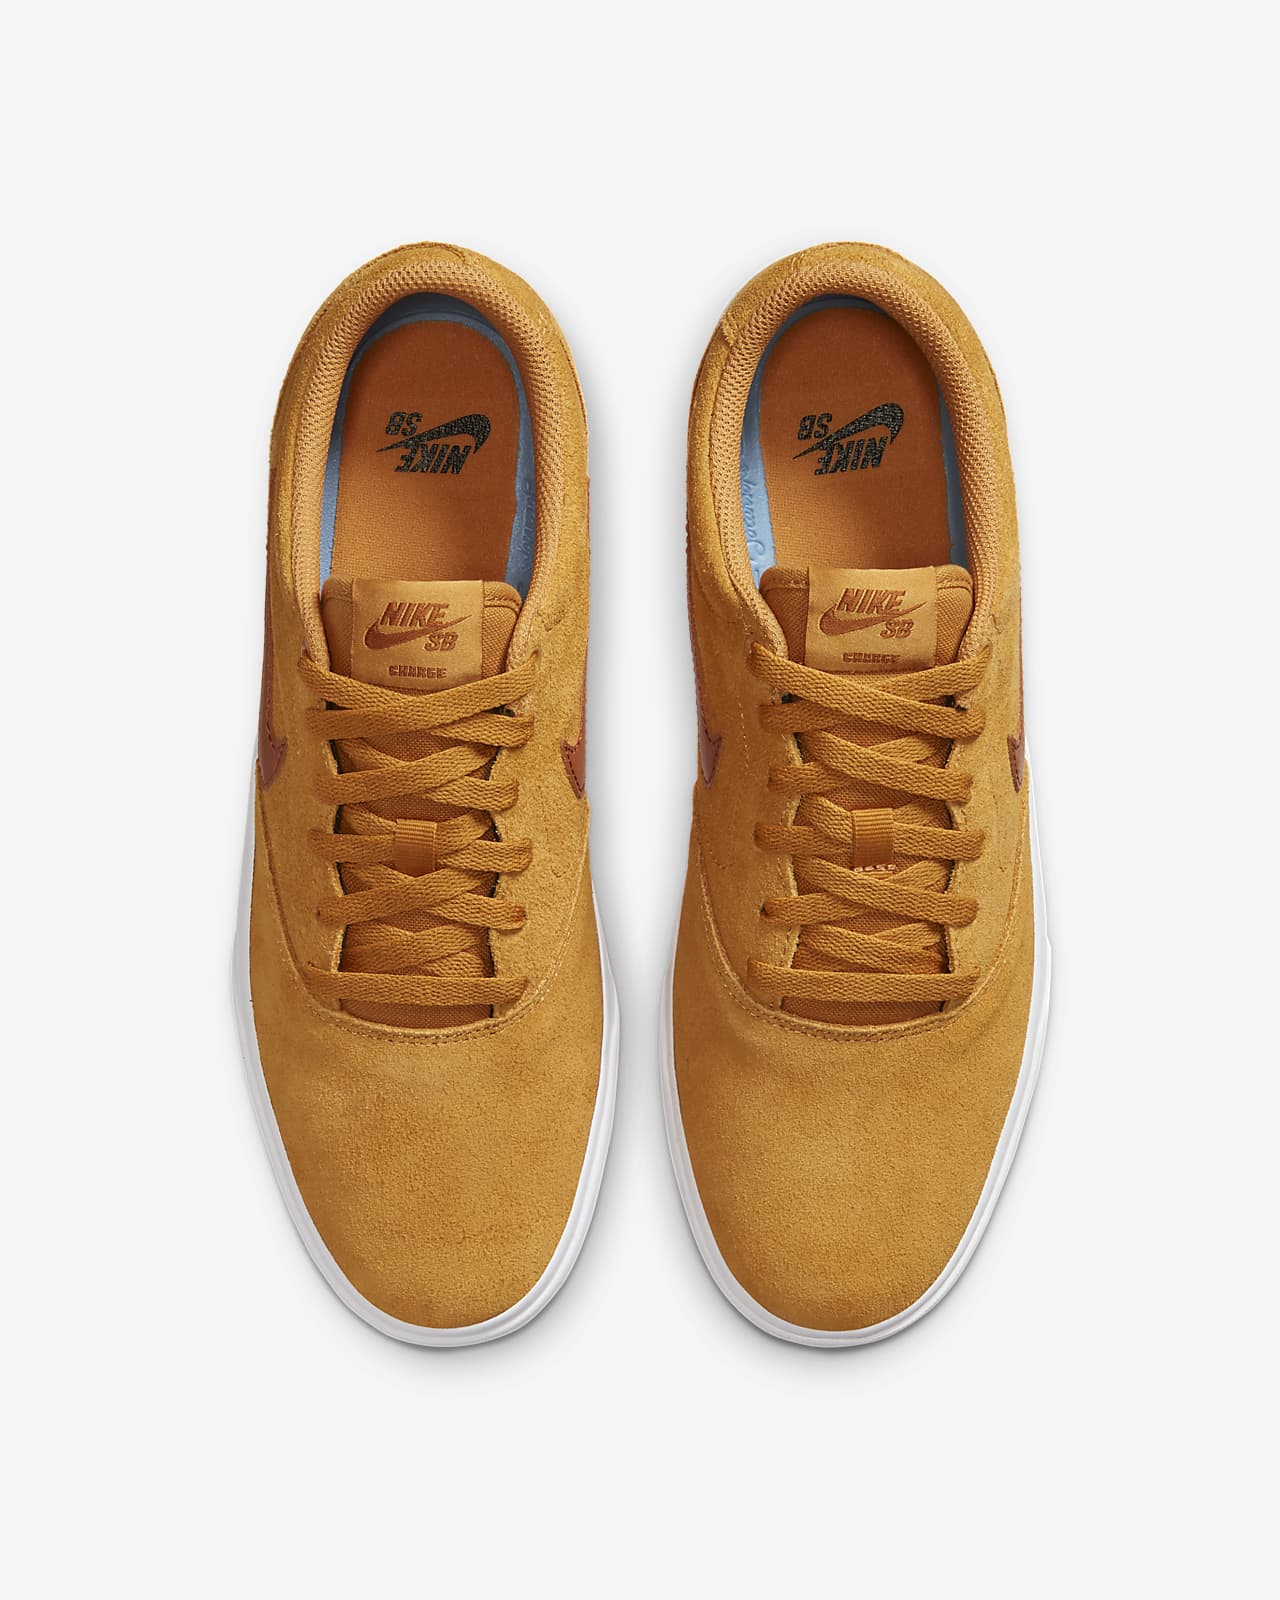 nike sb charge suede men's skate shoes